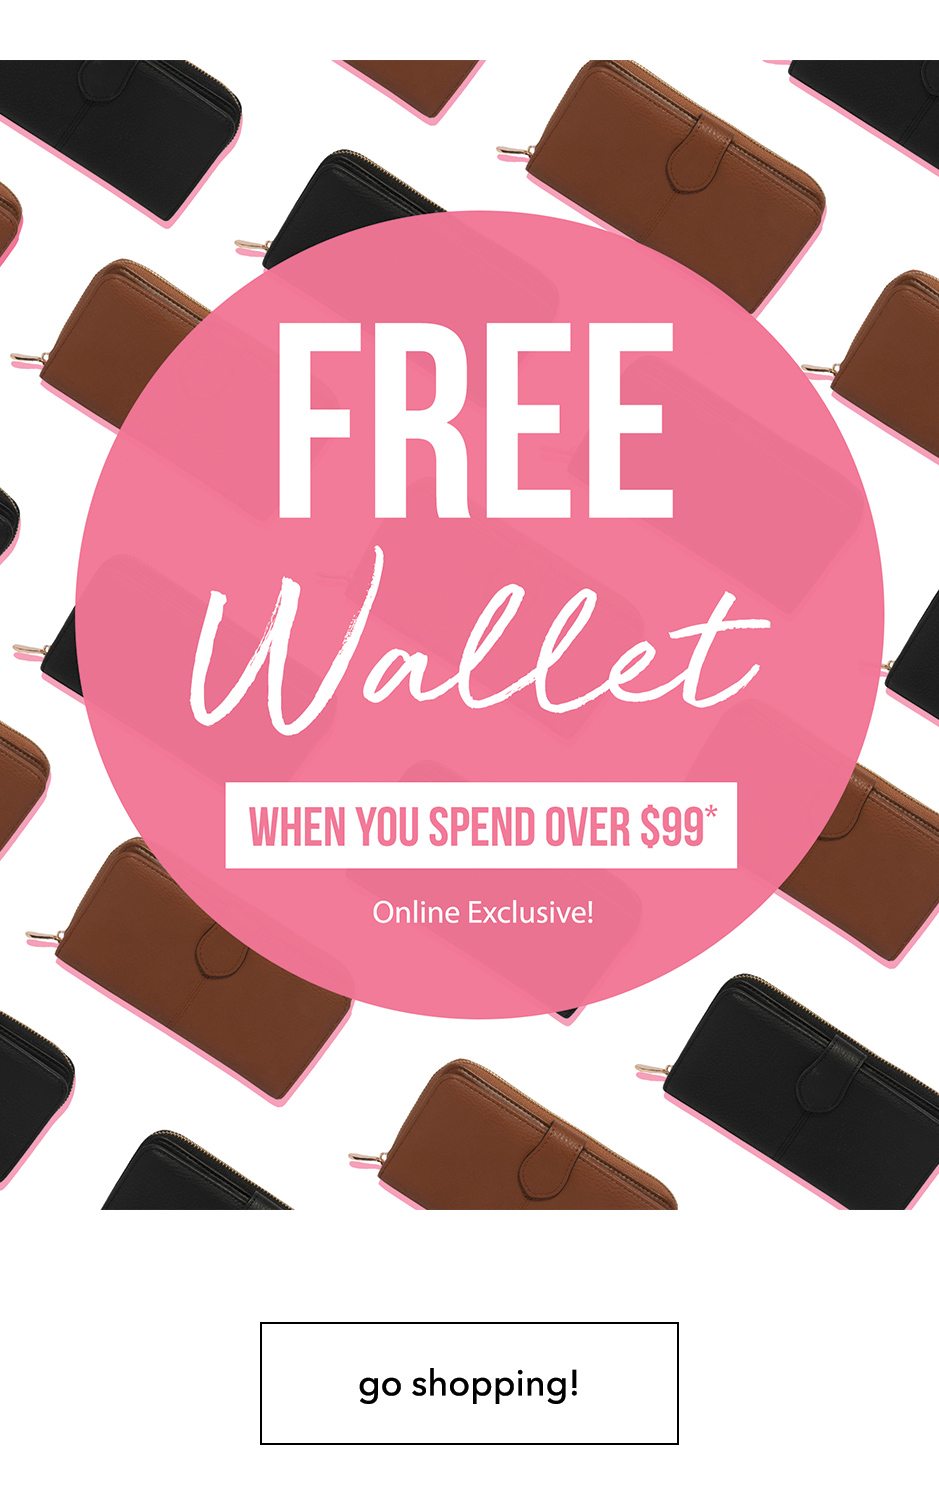 Free Wallet when you spend over $99!